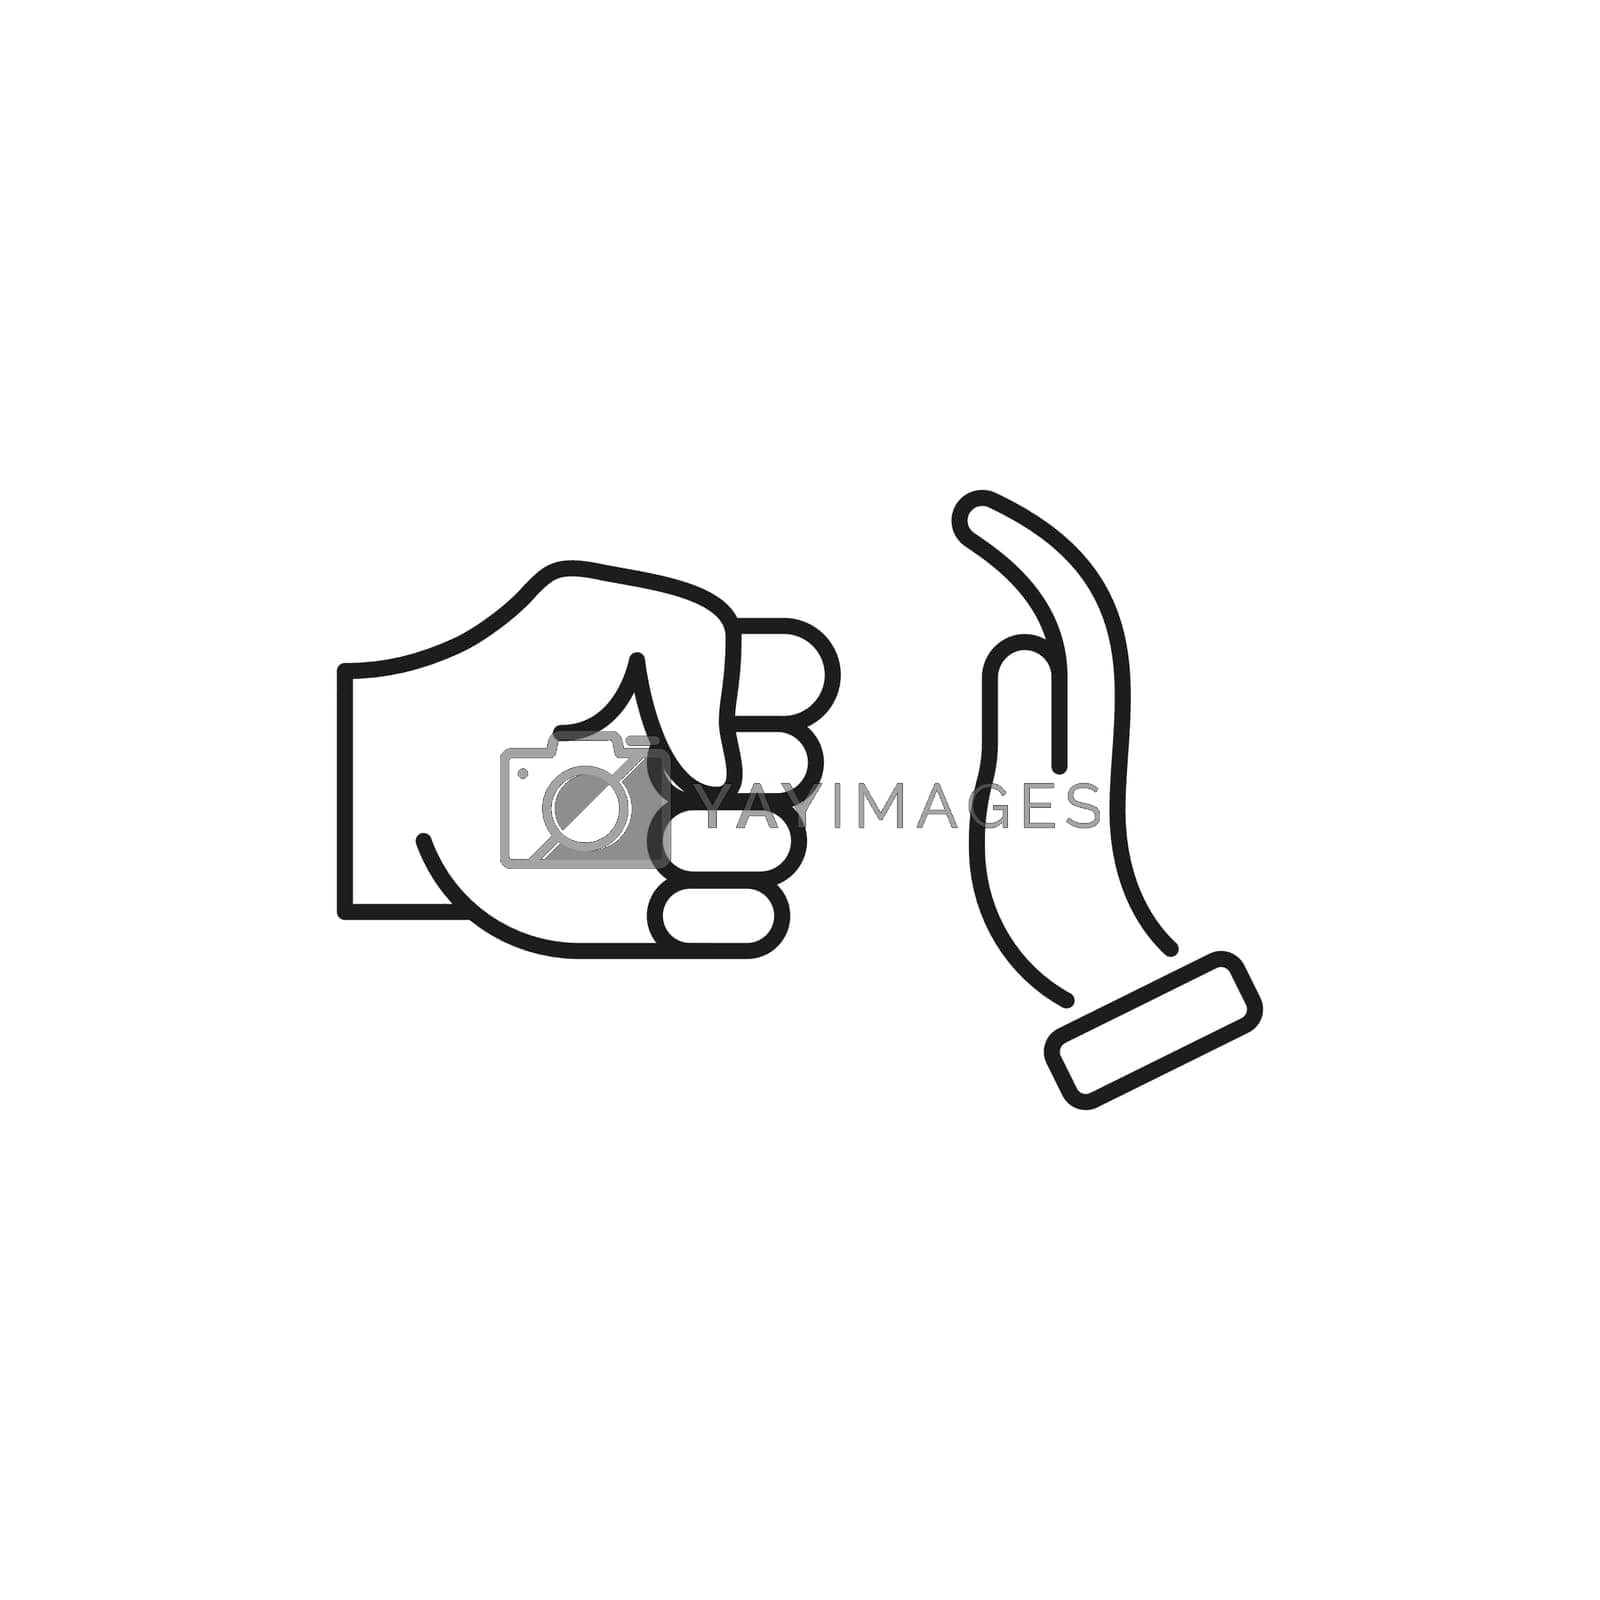 Royalty free image of Domestic Violence line icon. Stop Violence. Domestic Abuse. Fist as symbol of Violence. Line icon Fist and Stop Hand Gesture. Vector illustration by Toxa2x2